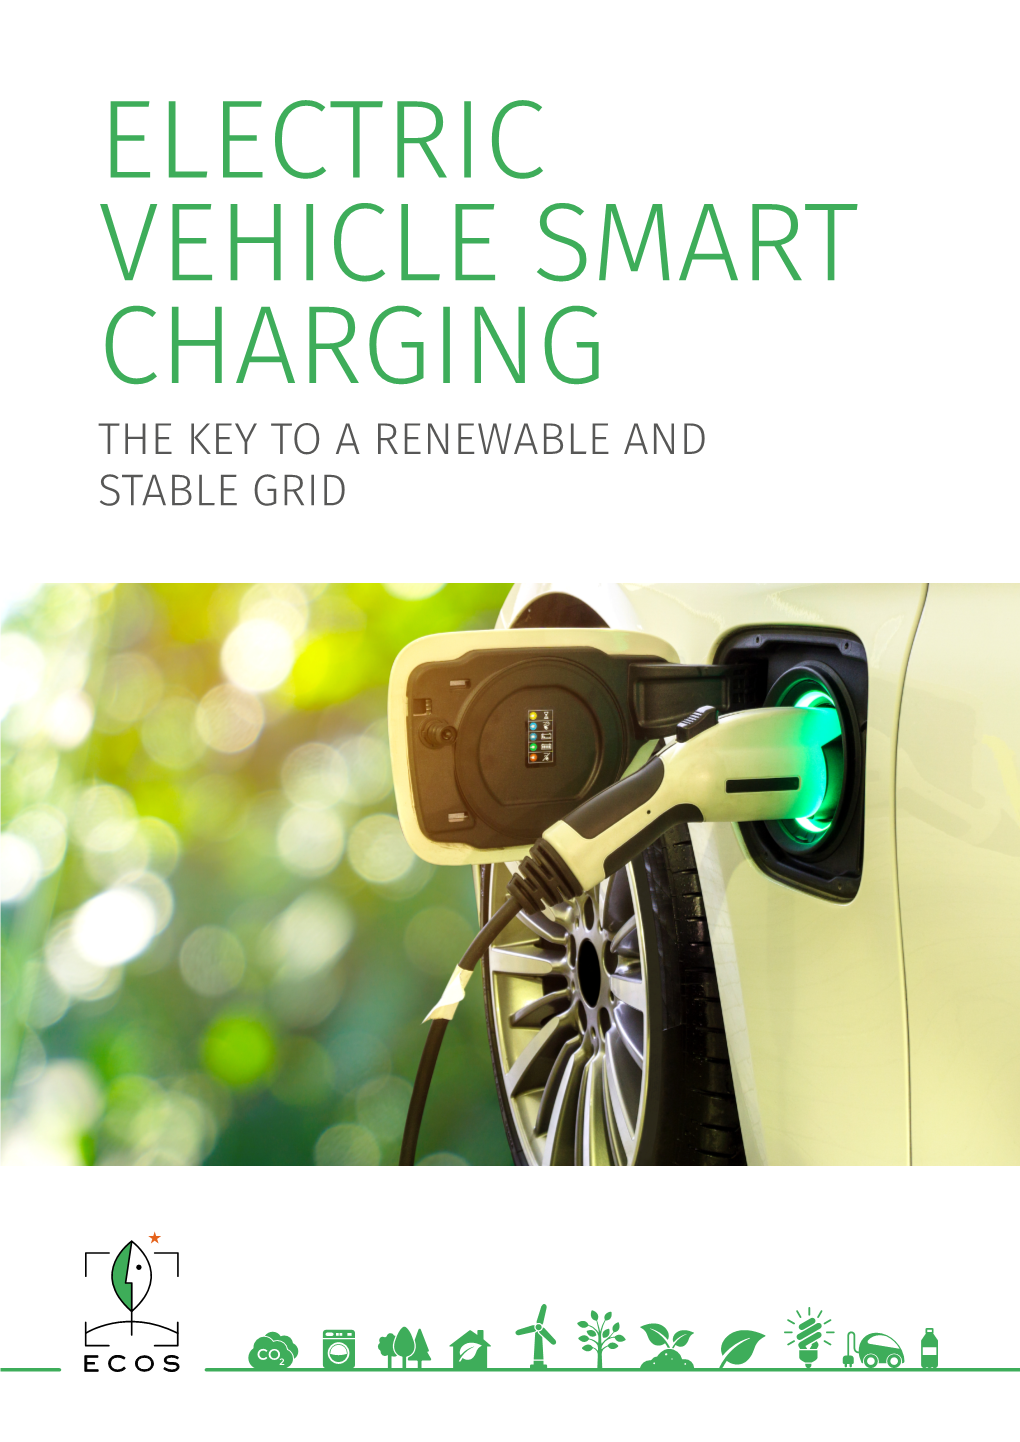 Electric Vehicle Smart Charging the Key to a Renewable and Stable Grid